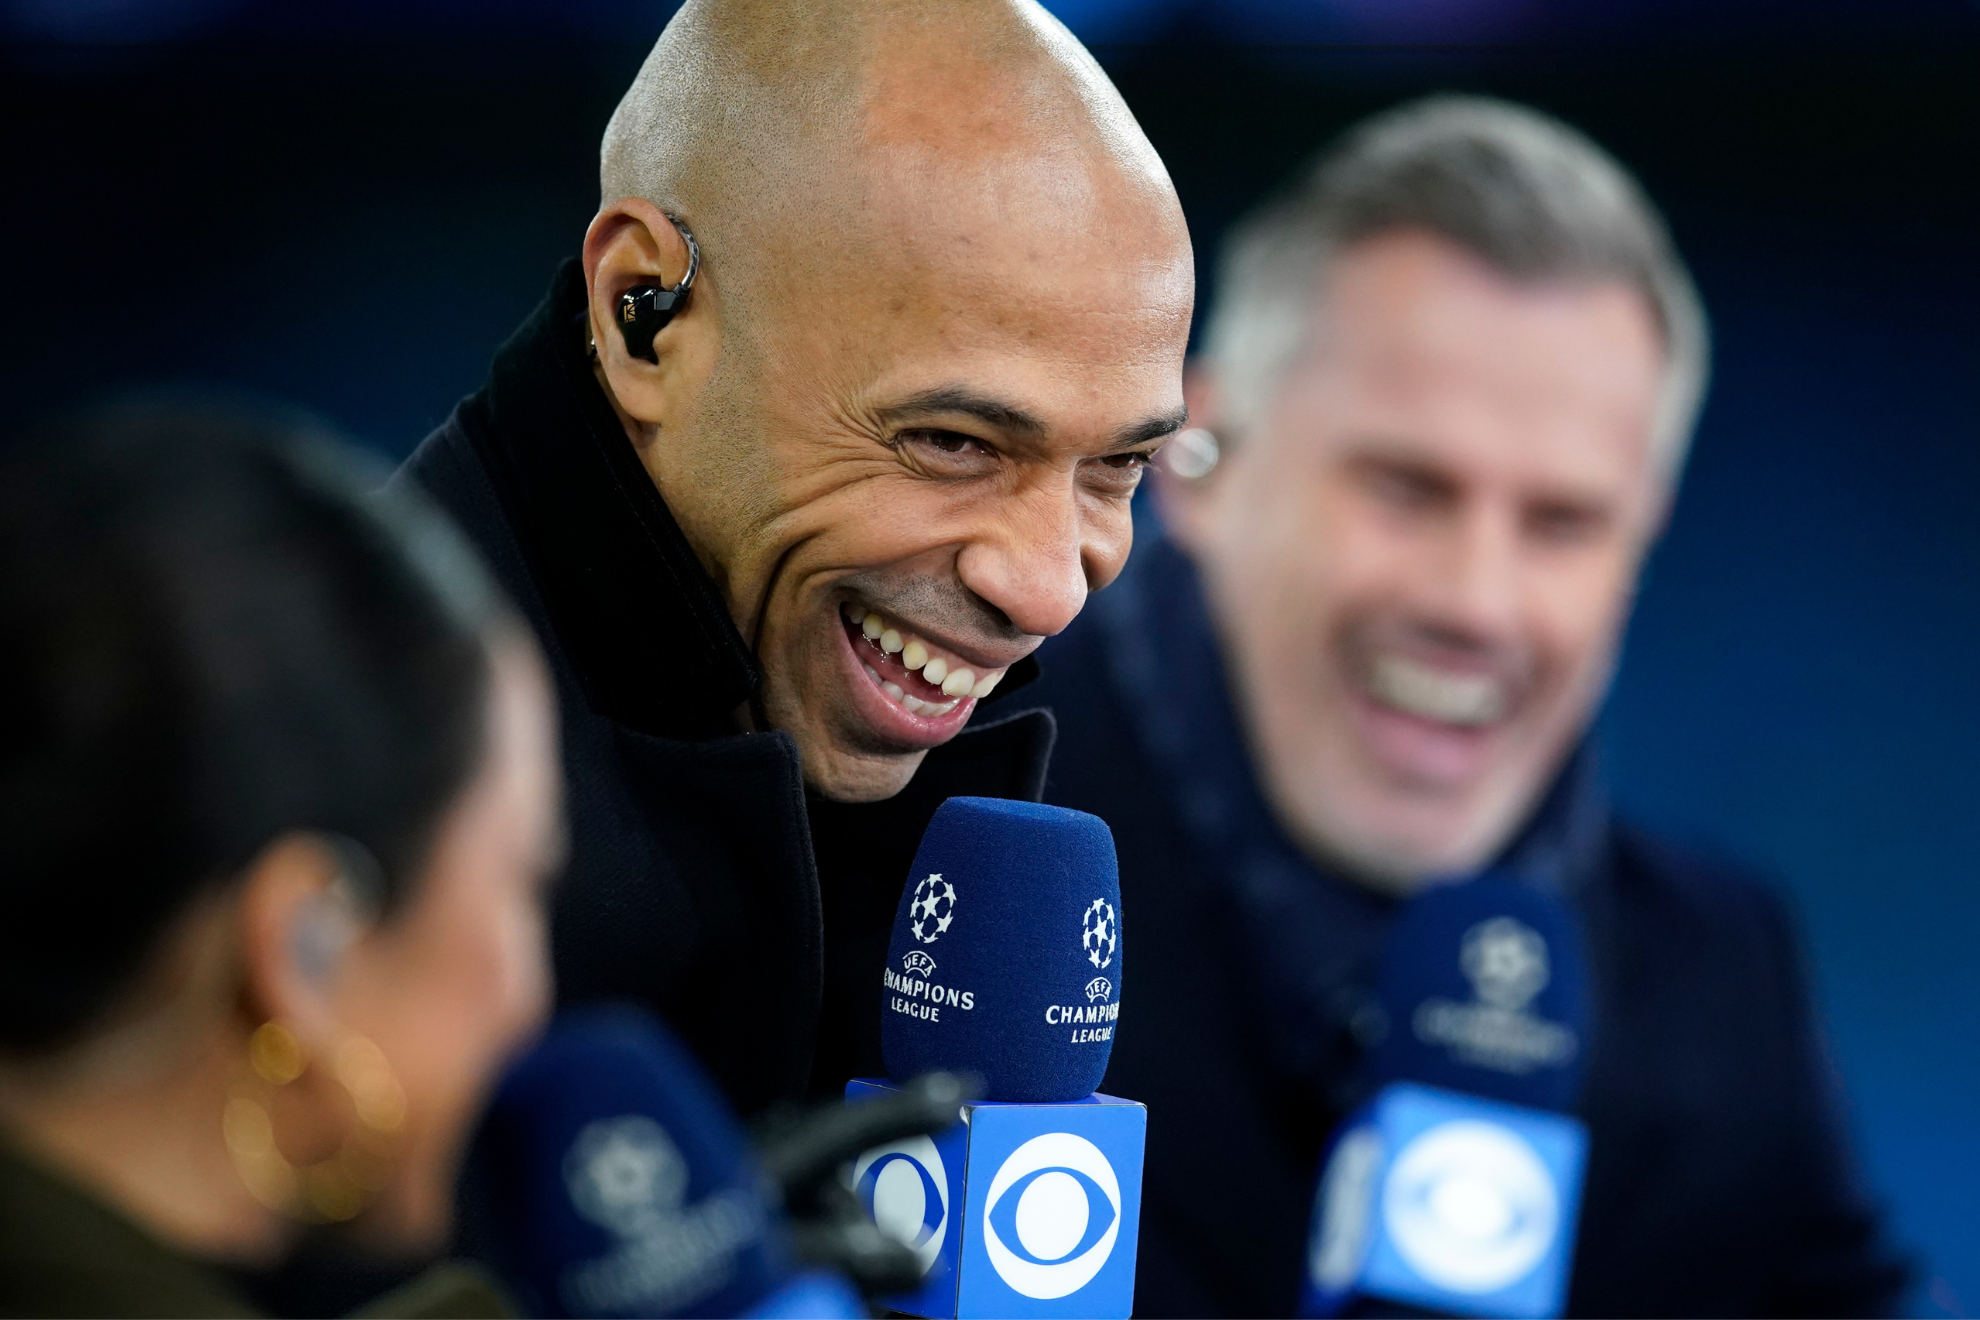 Henry (foreground) and Carragher (background) during a Champions League broadcast.